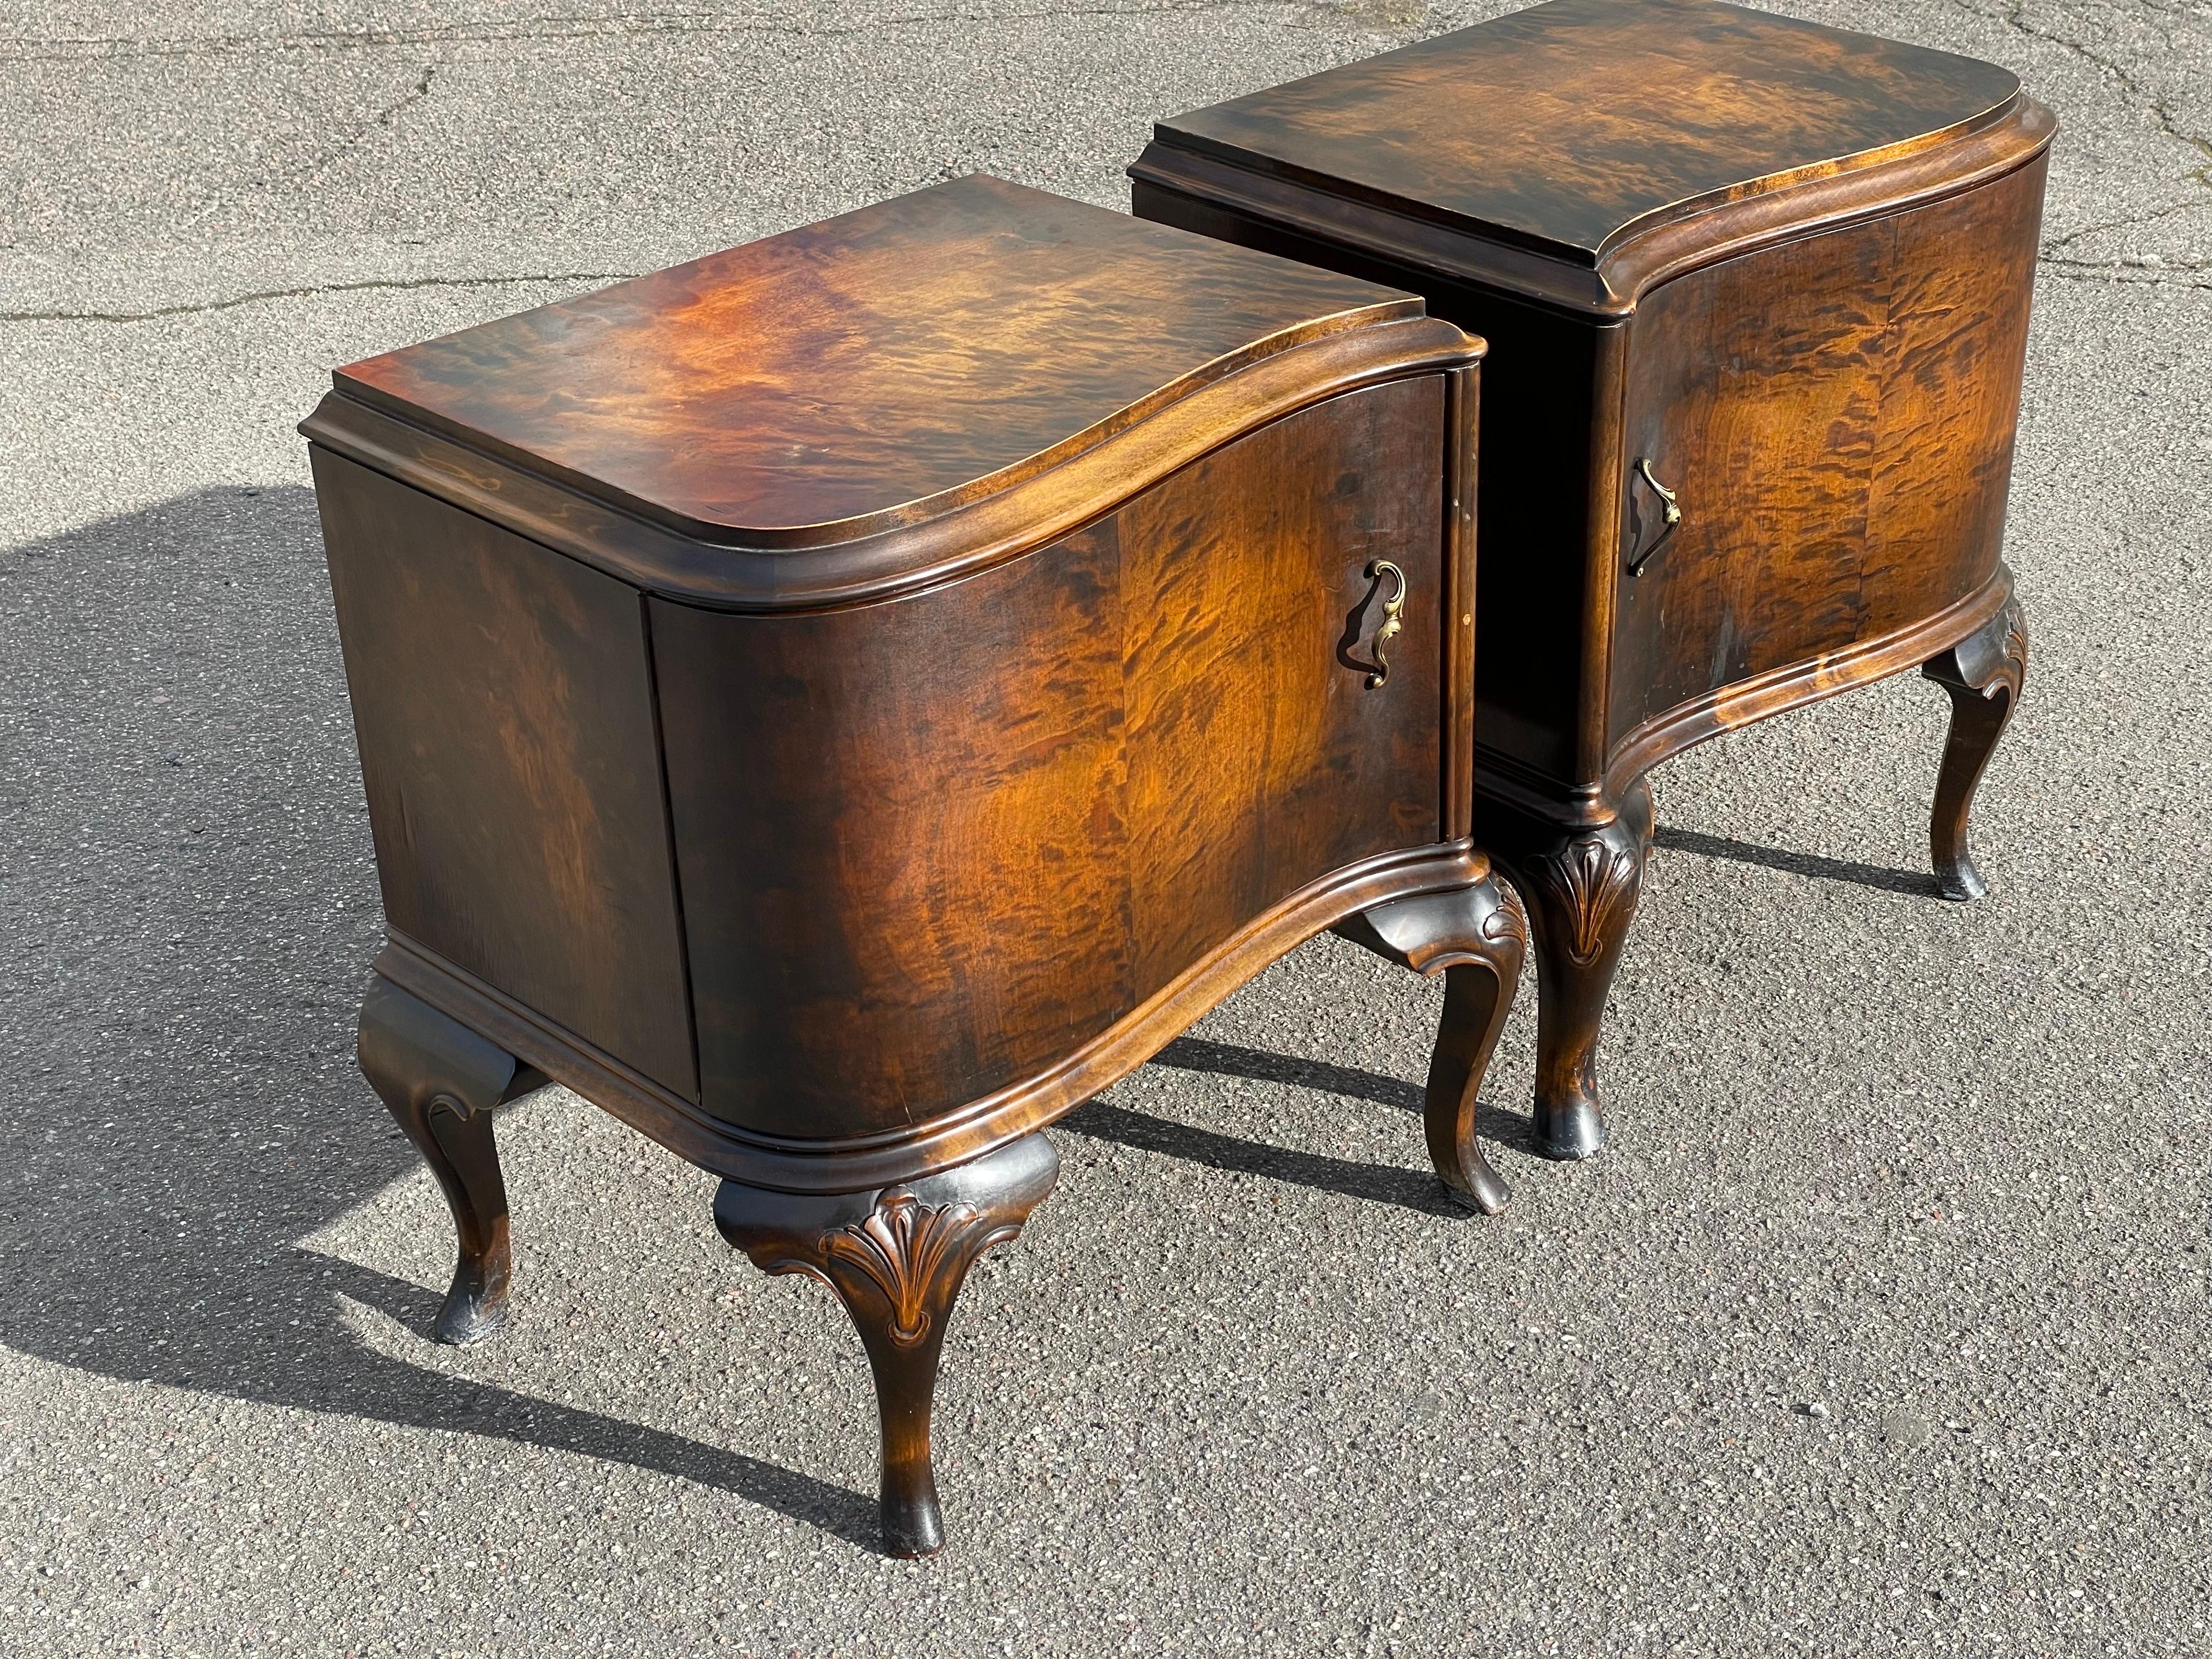 These stunning, 1930s, nightstands are a true reflection of eclectic Art Deco style with a Hollywood Regency twist. Crafted from rich, warm walnut wood, they boast a perfect balance of vintage charm and modern functionality. Their unique design